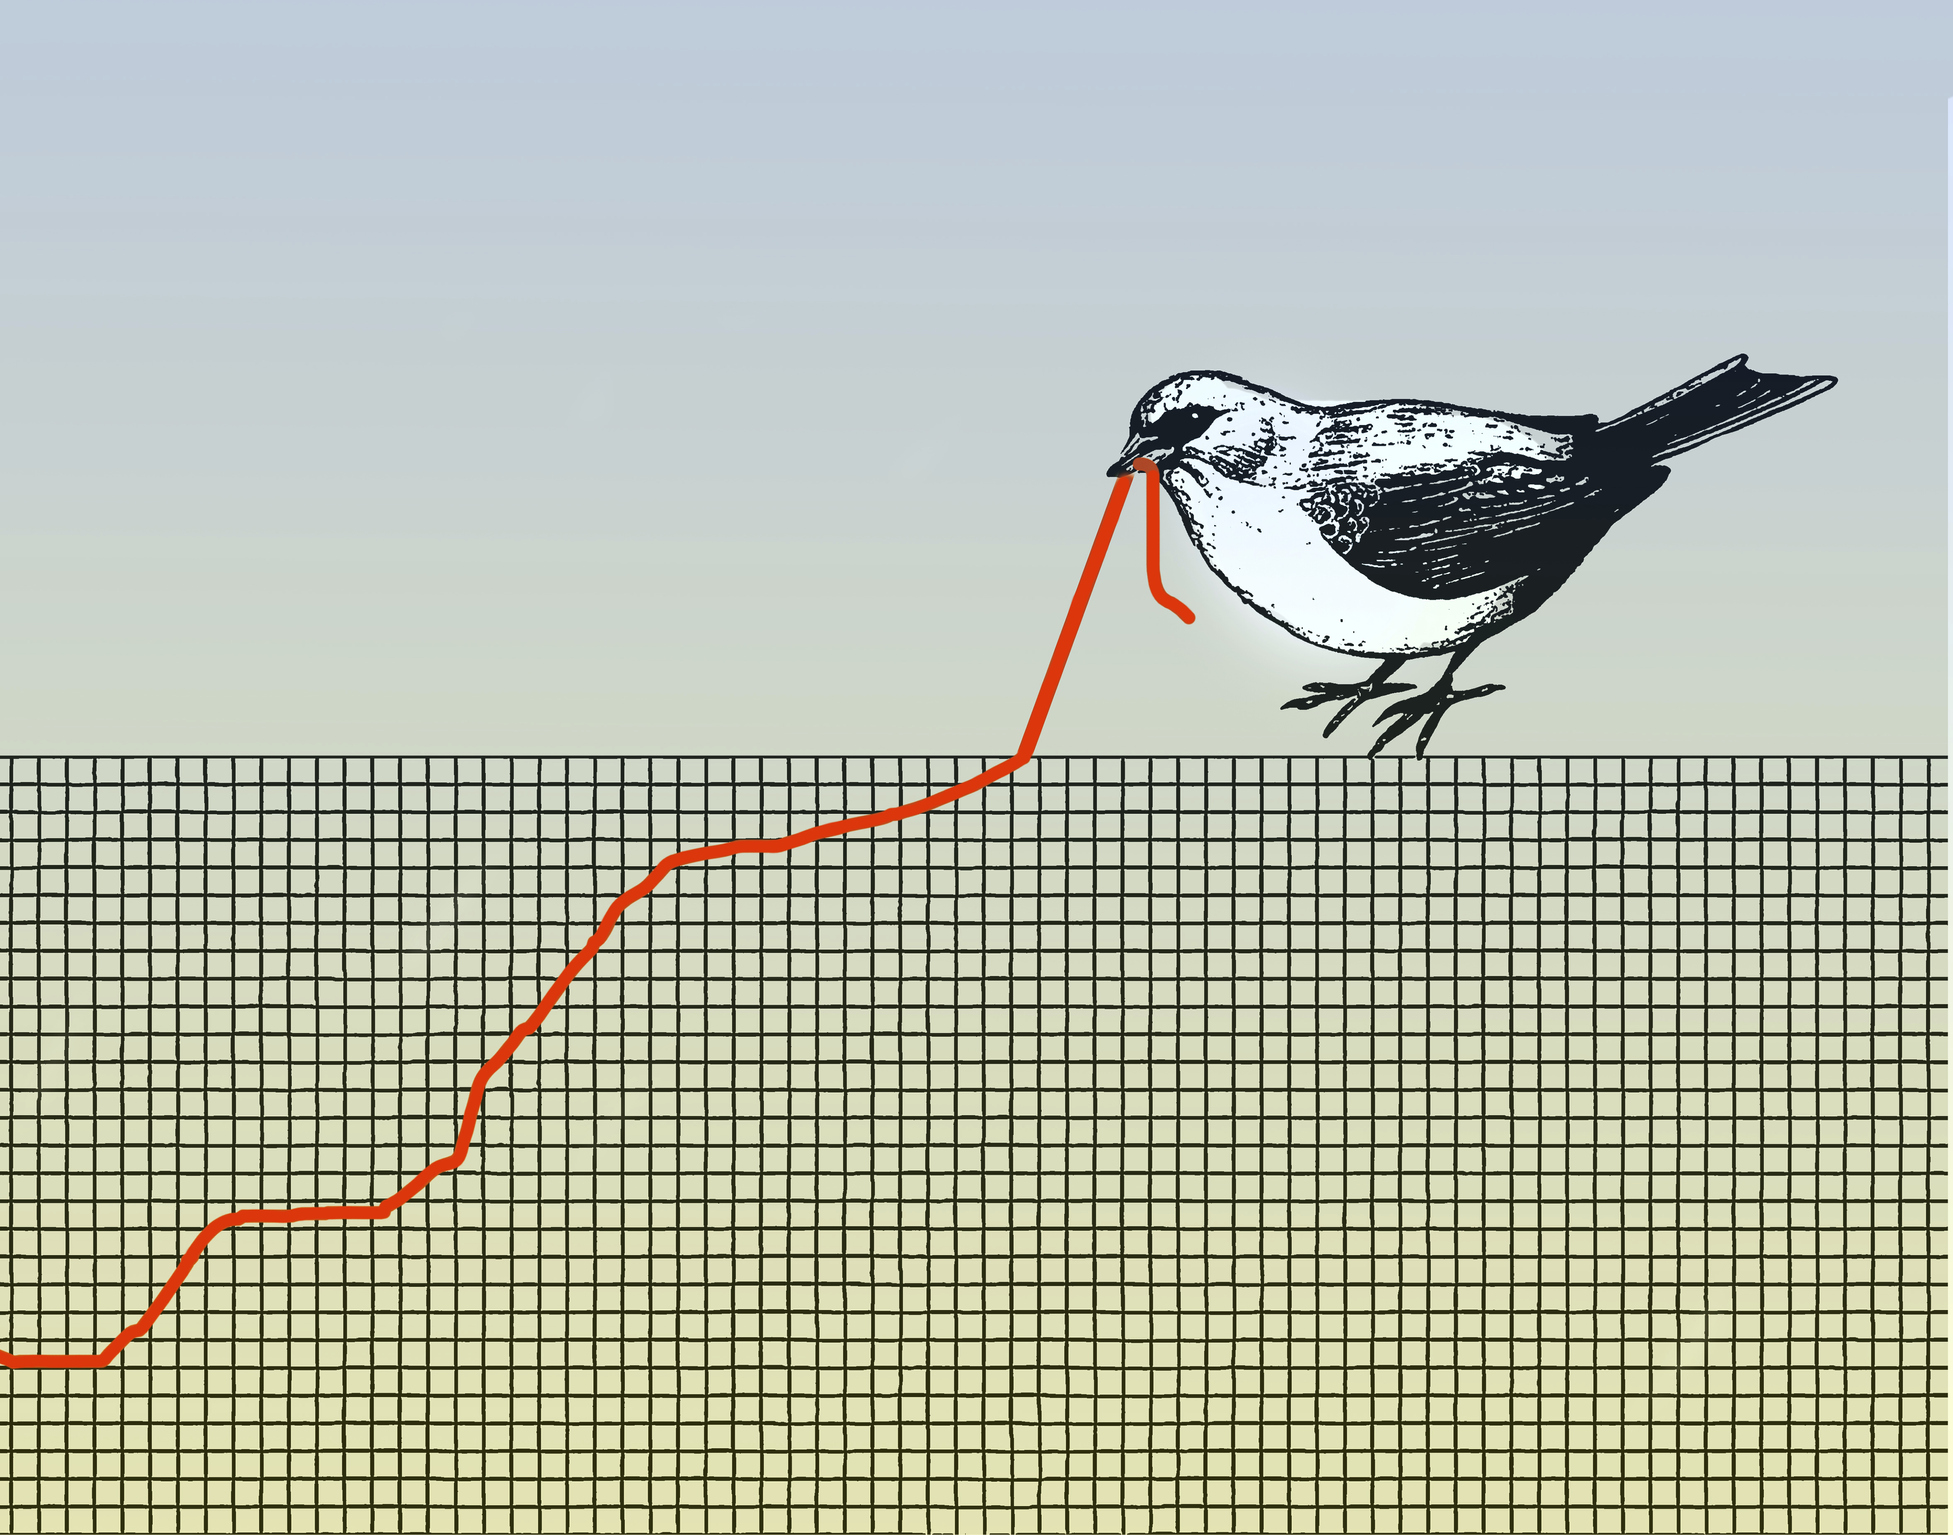 Conceptual illustration of a bird shooting at a worm-like graphic illustrating wrestling.